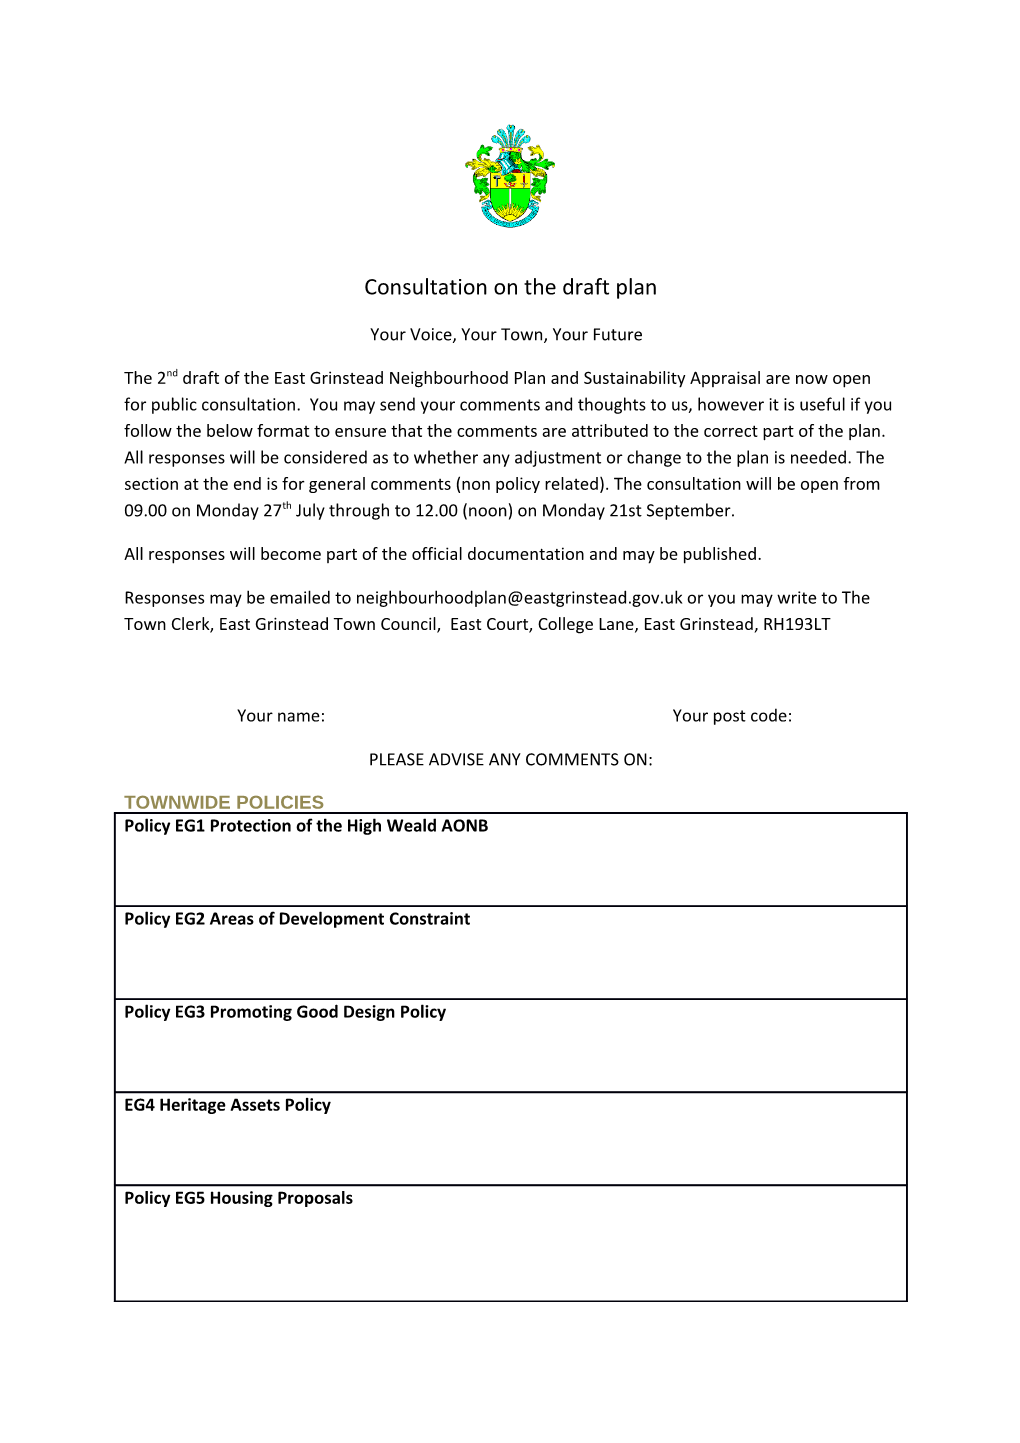 Consultation on the Draft Plan